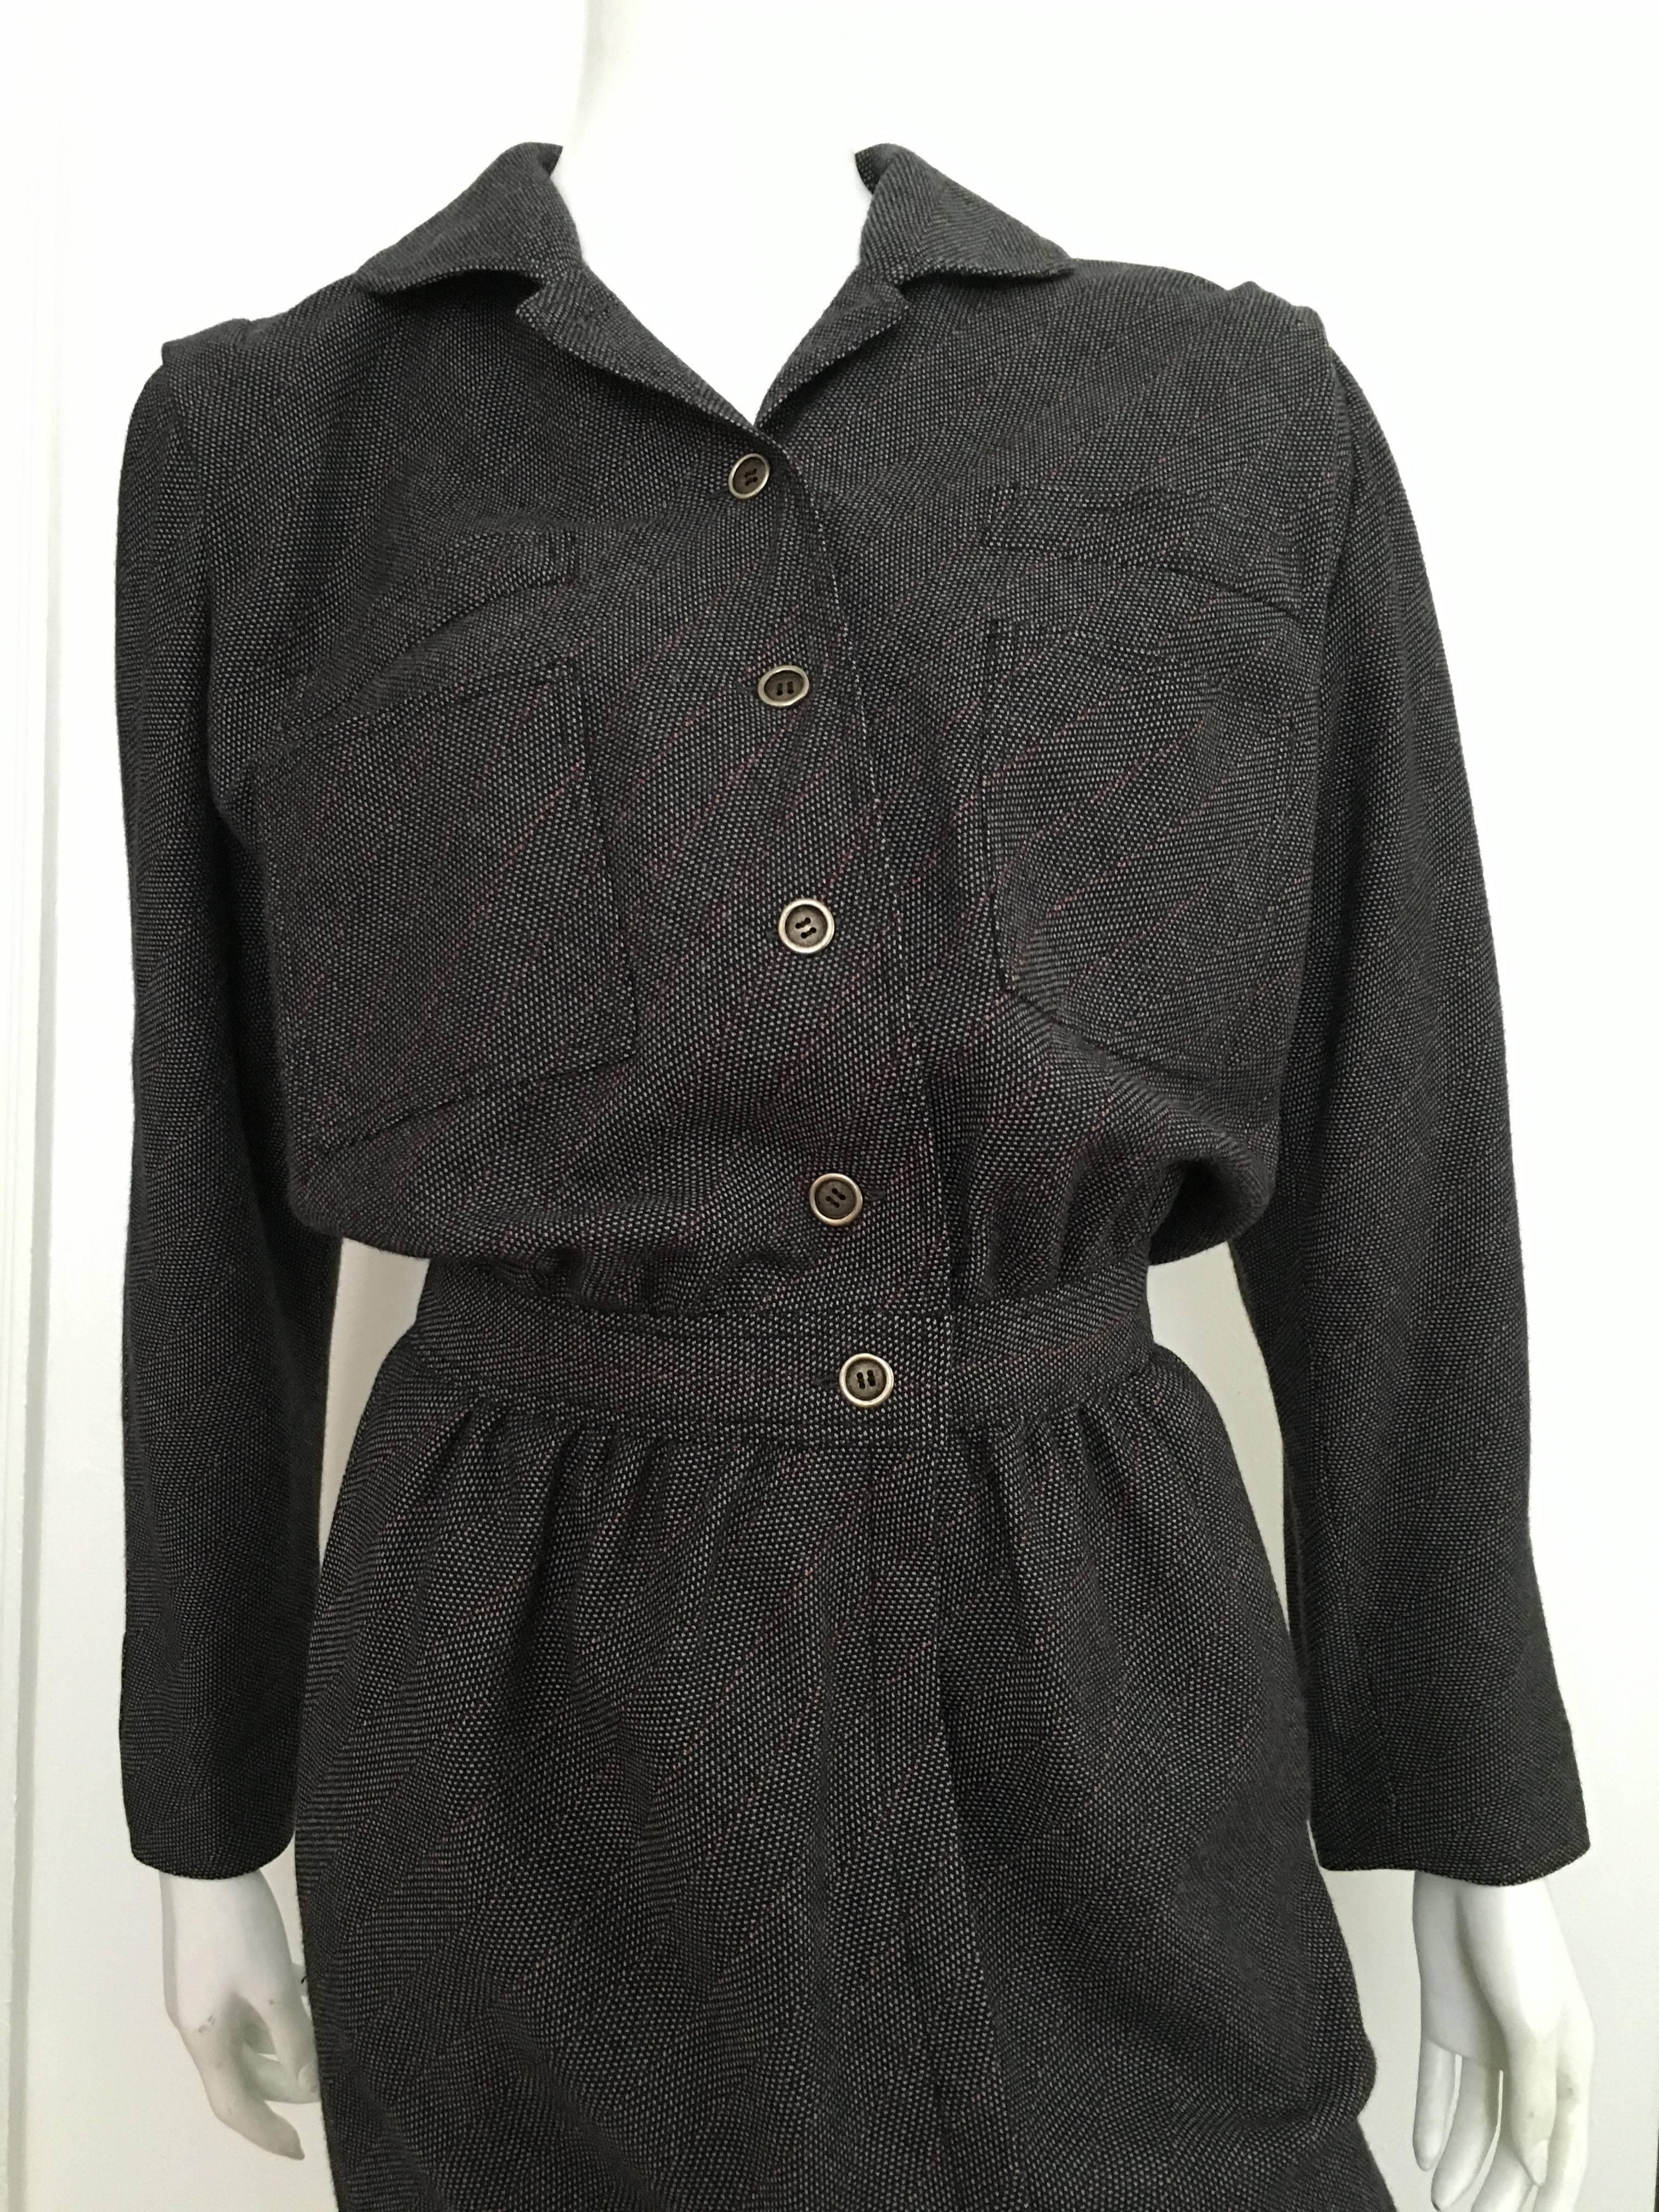 Emanuel Ungaro Parallele Paris 1980s wool long sleeves partial button up dress with pockets is a vintage size 8 but fits like a modern size 4.  Ladies please use your measuring tape so you can properly measure your bust, waist & hips to make certain